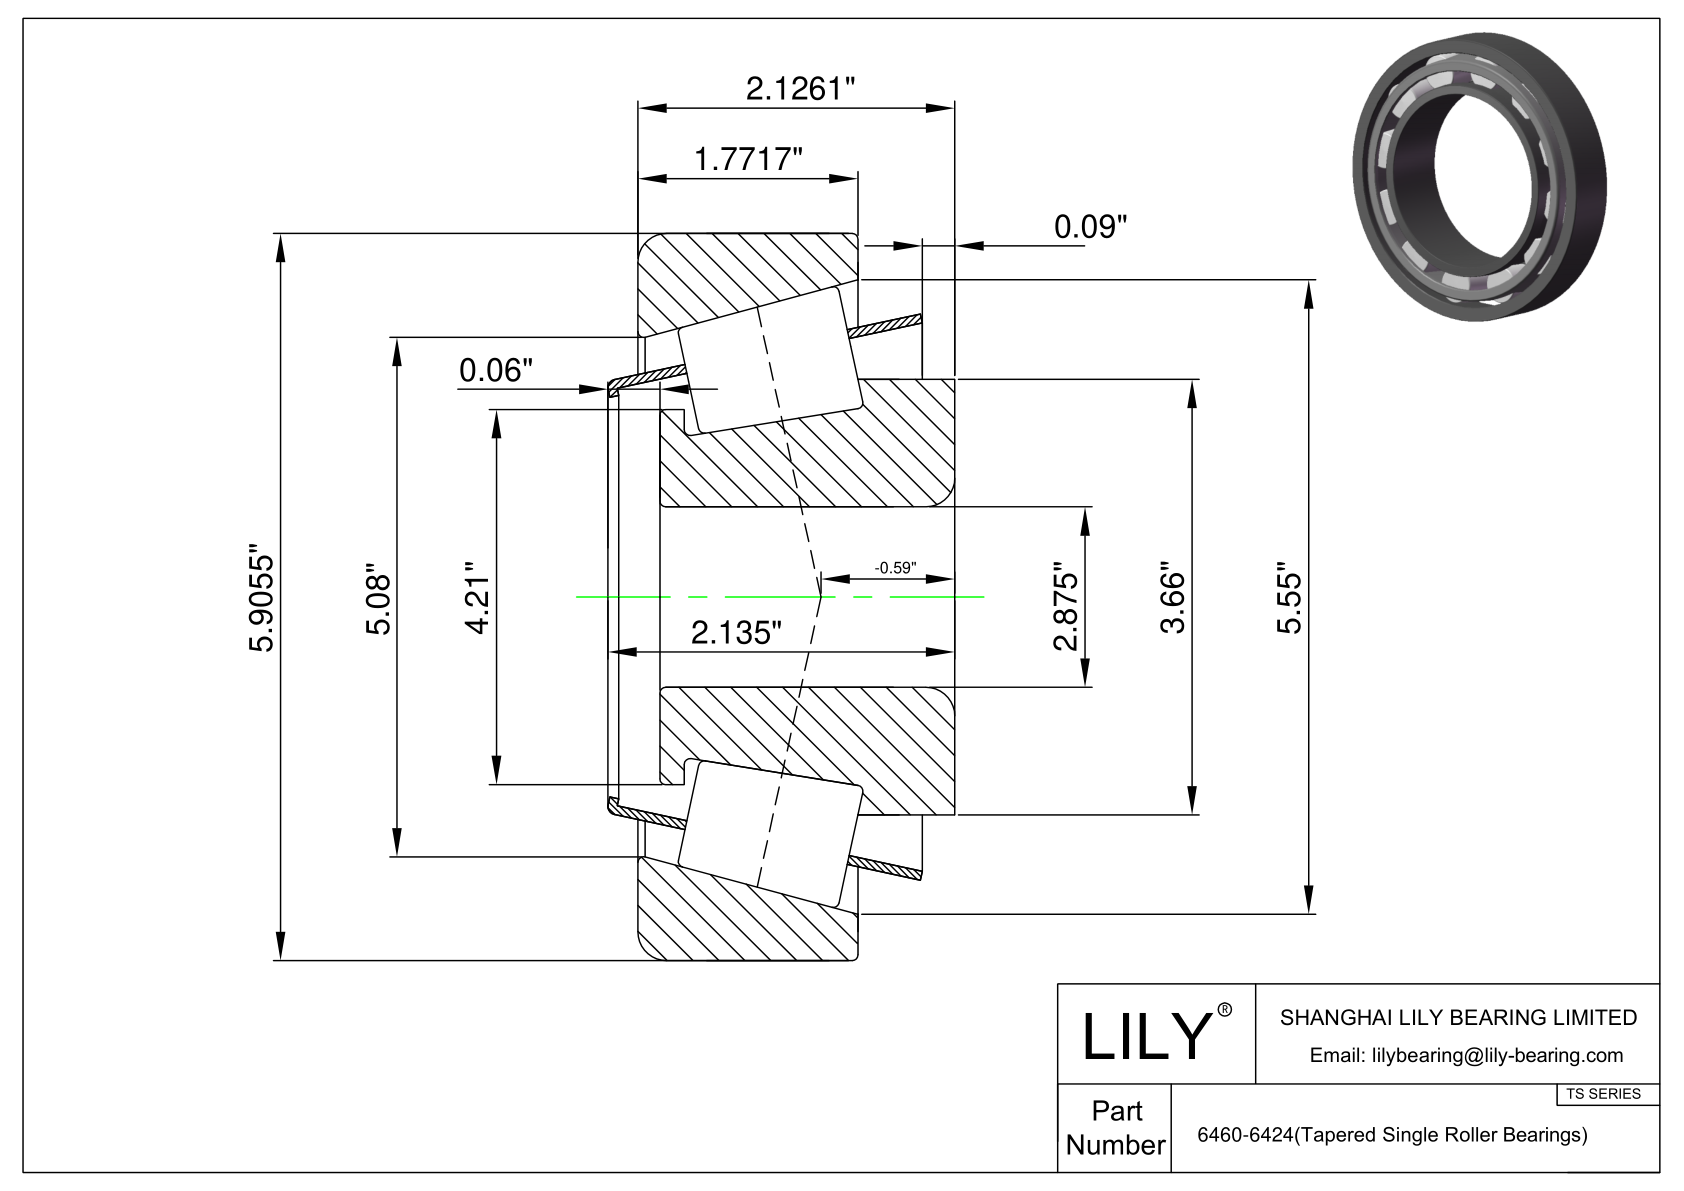 6460-6424 TS (Tapered Single Roller Bearings) (Imperial) cad drawing